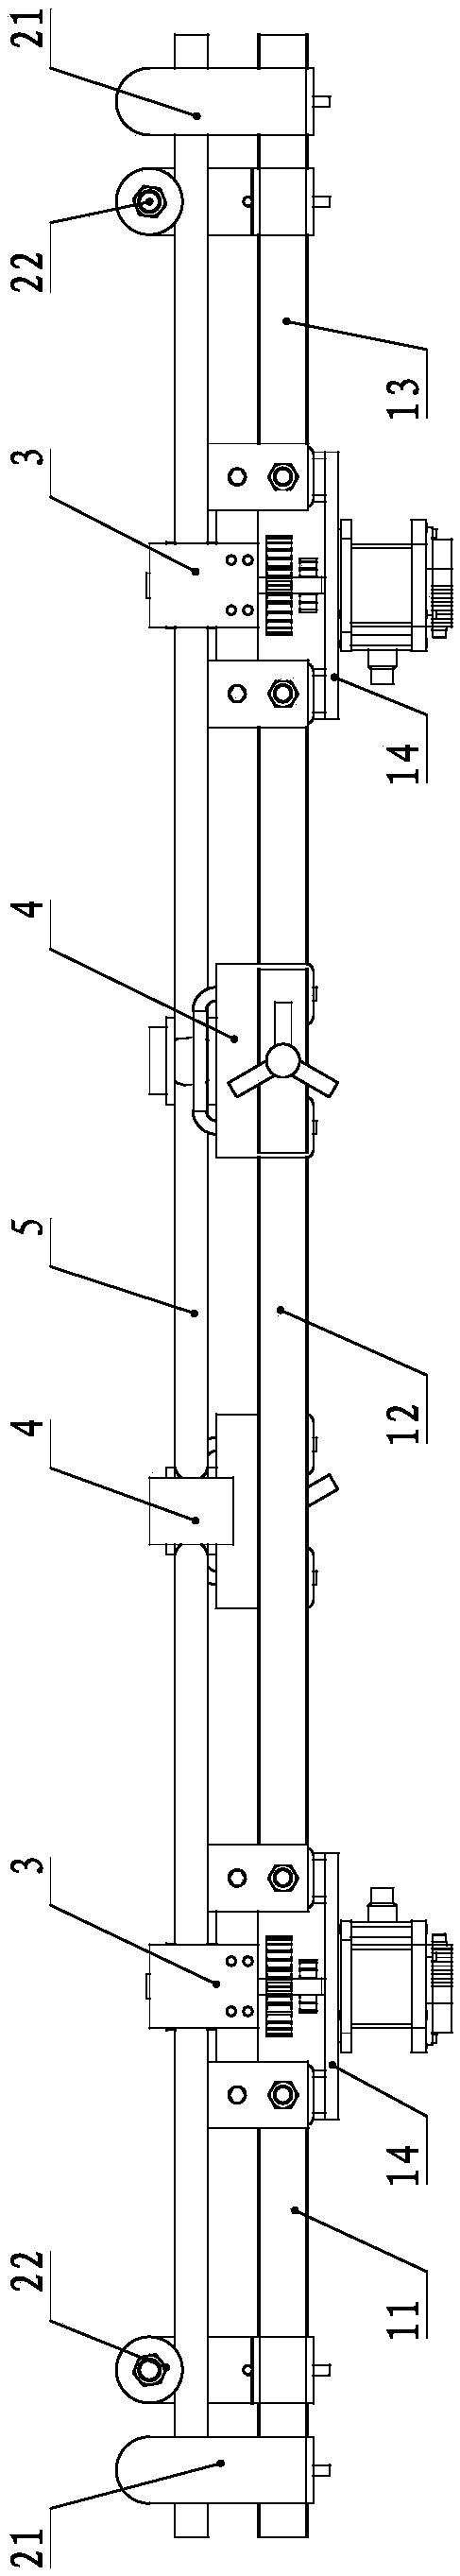 A transmission line deicing device